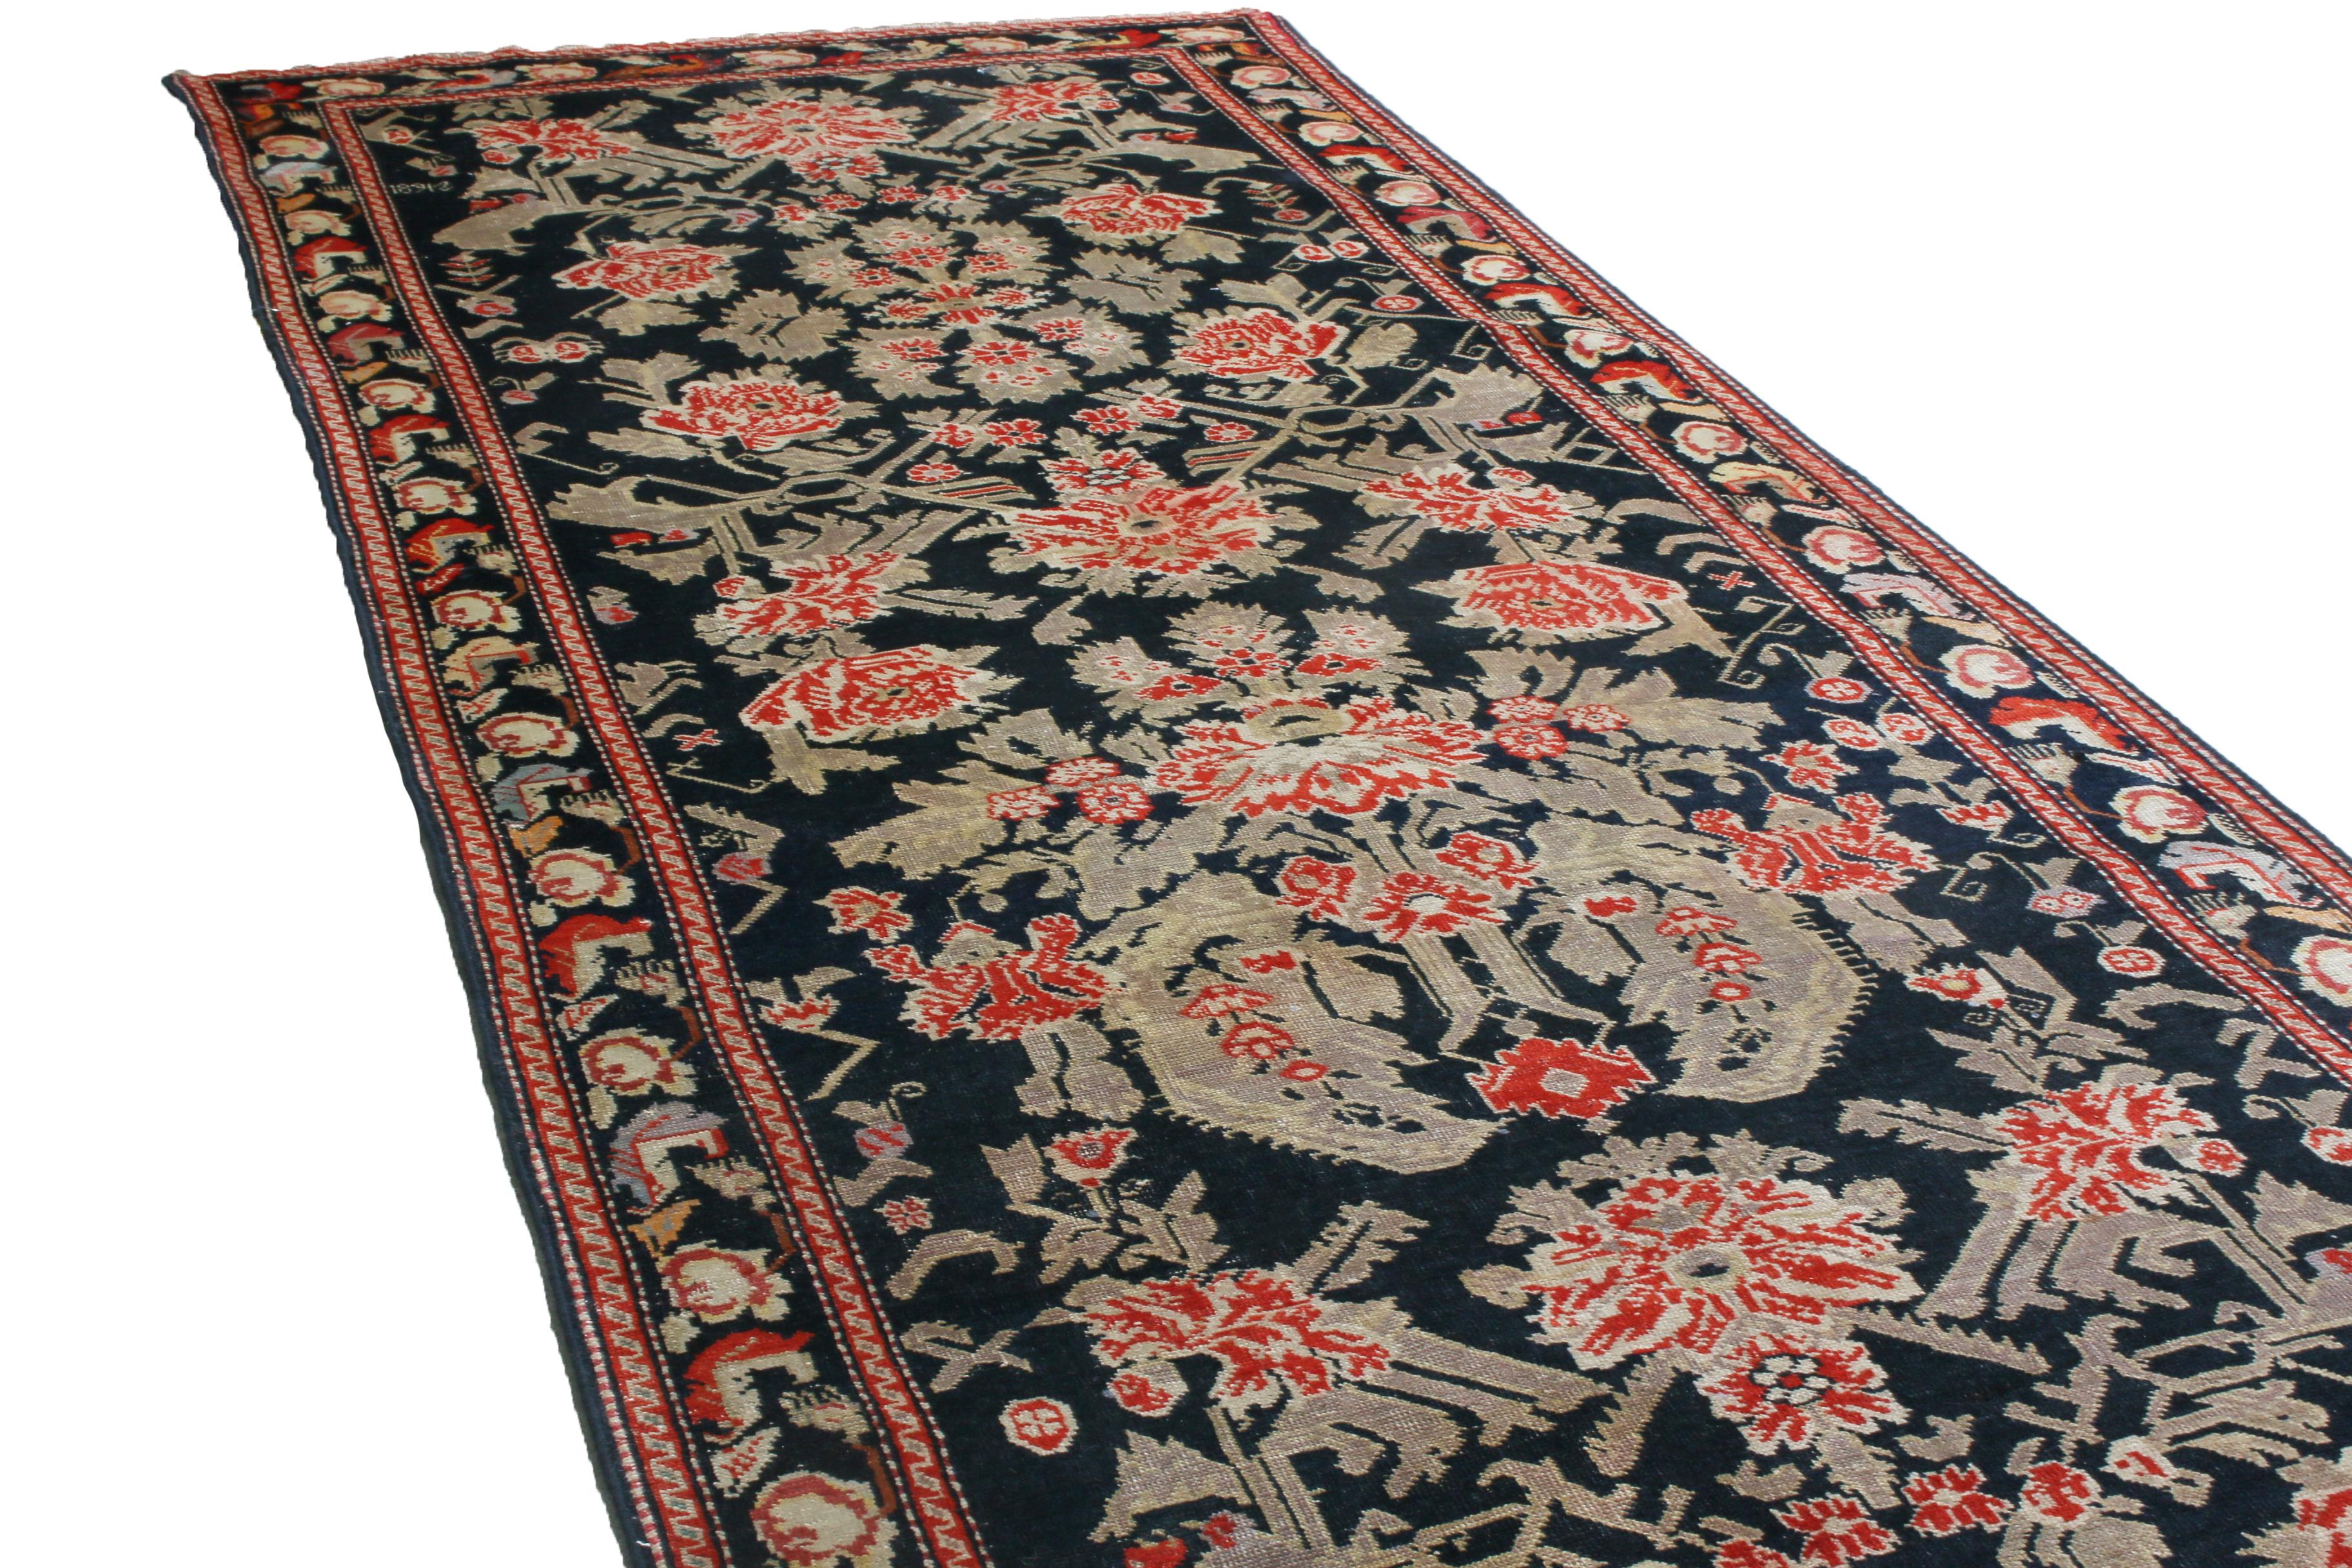 Russian Antique Karabagh Black and Red Wool Floral Runner Floral Pattern by Rug & Kilim For Sale